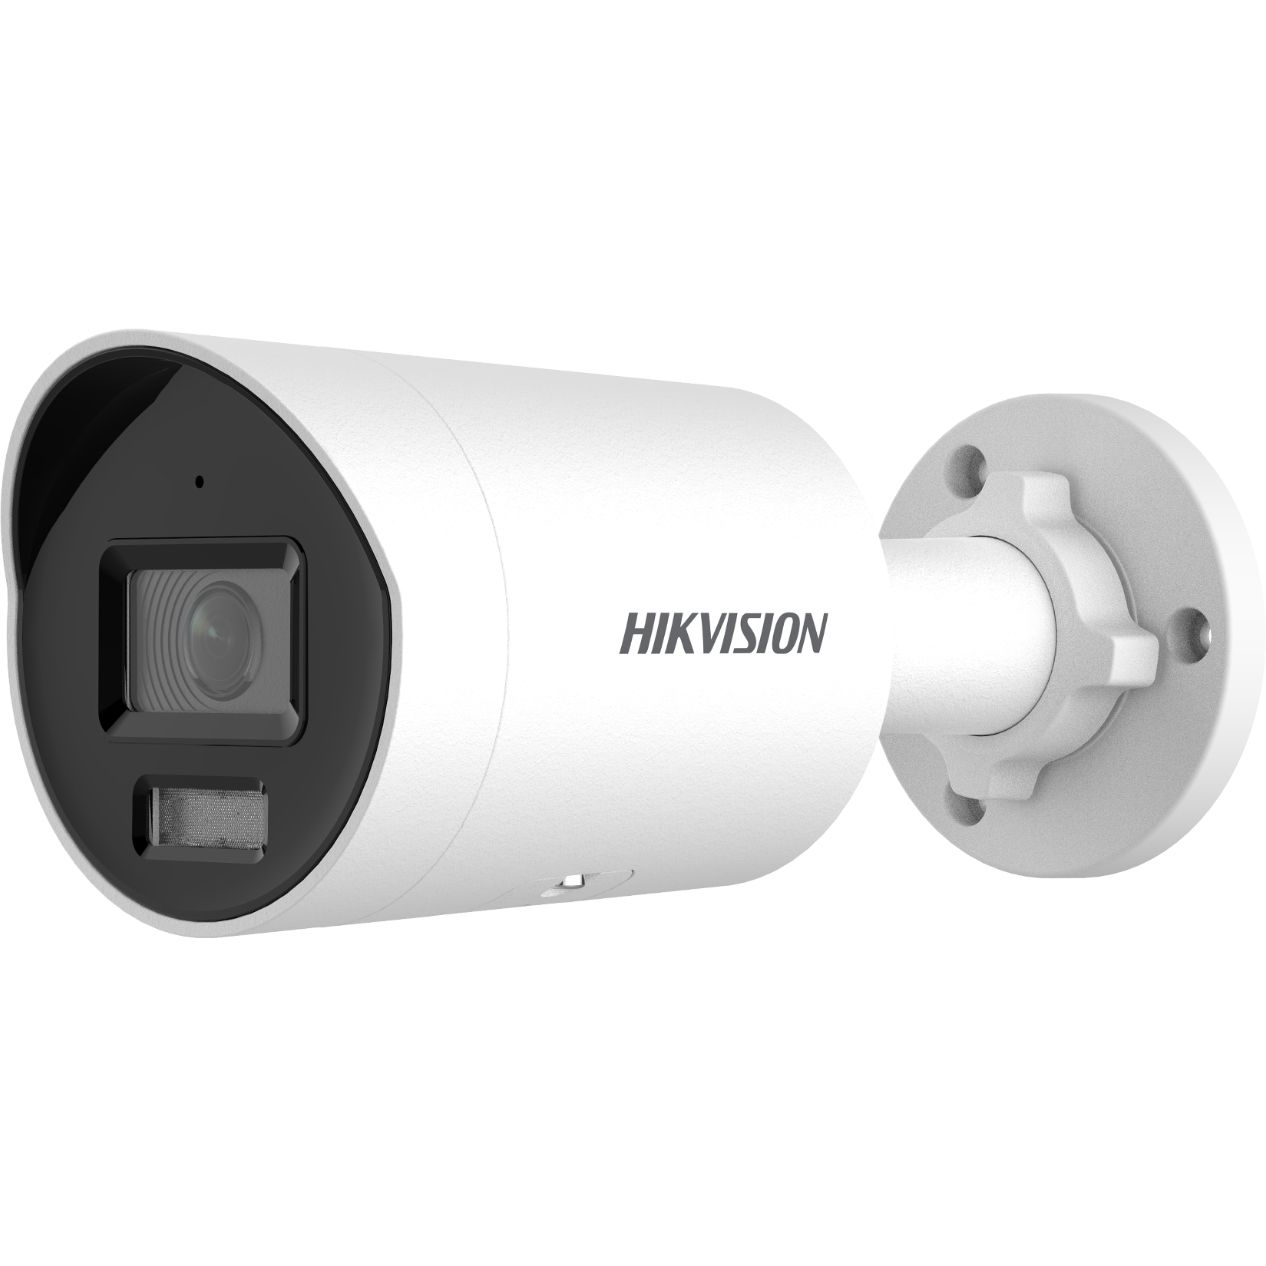 IP-камера Hikvision DS-2CD2023G2-IU(2.8mm) white (УТ-00042017) ip камера hikvision ds 2cd2083g2 iu 2 8mm white